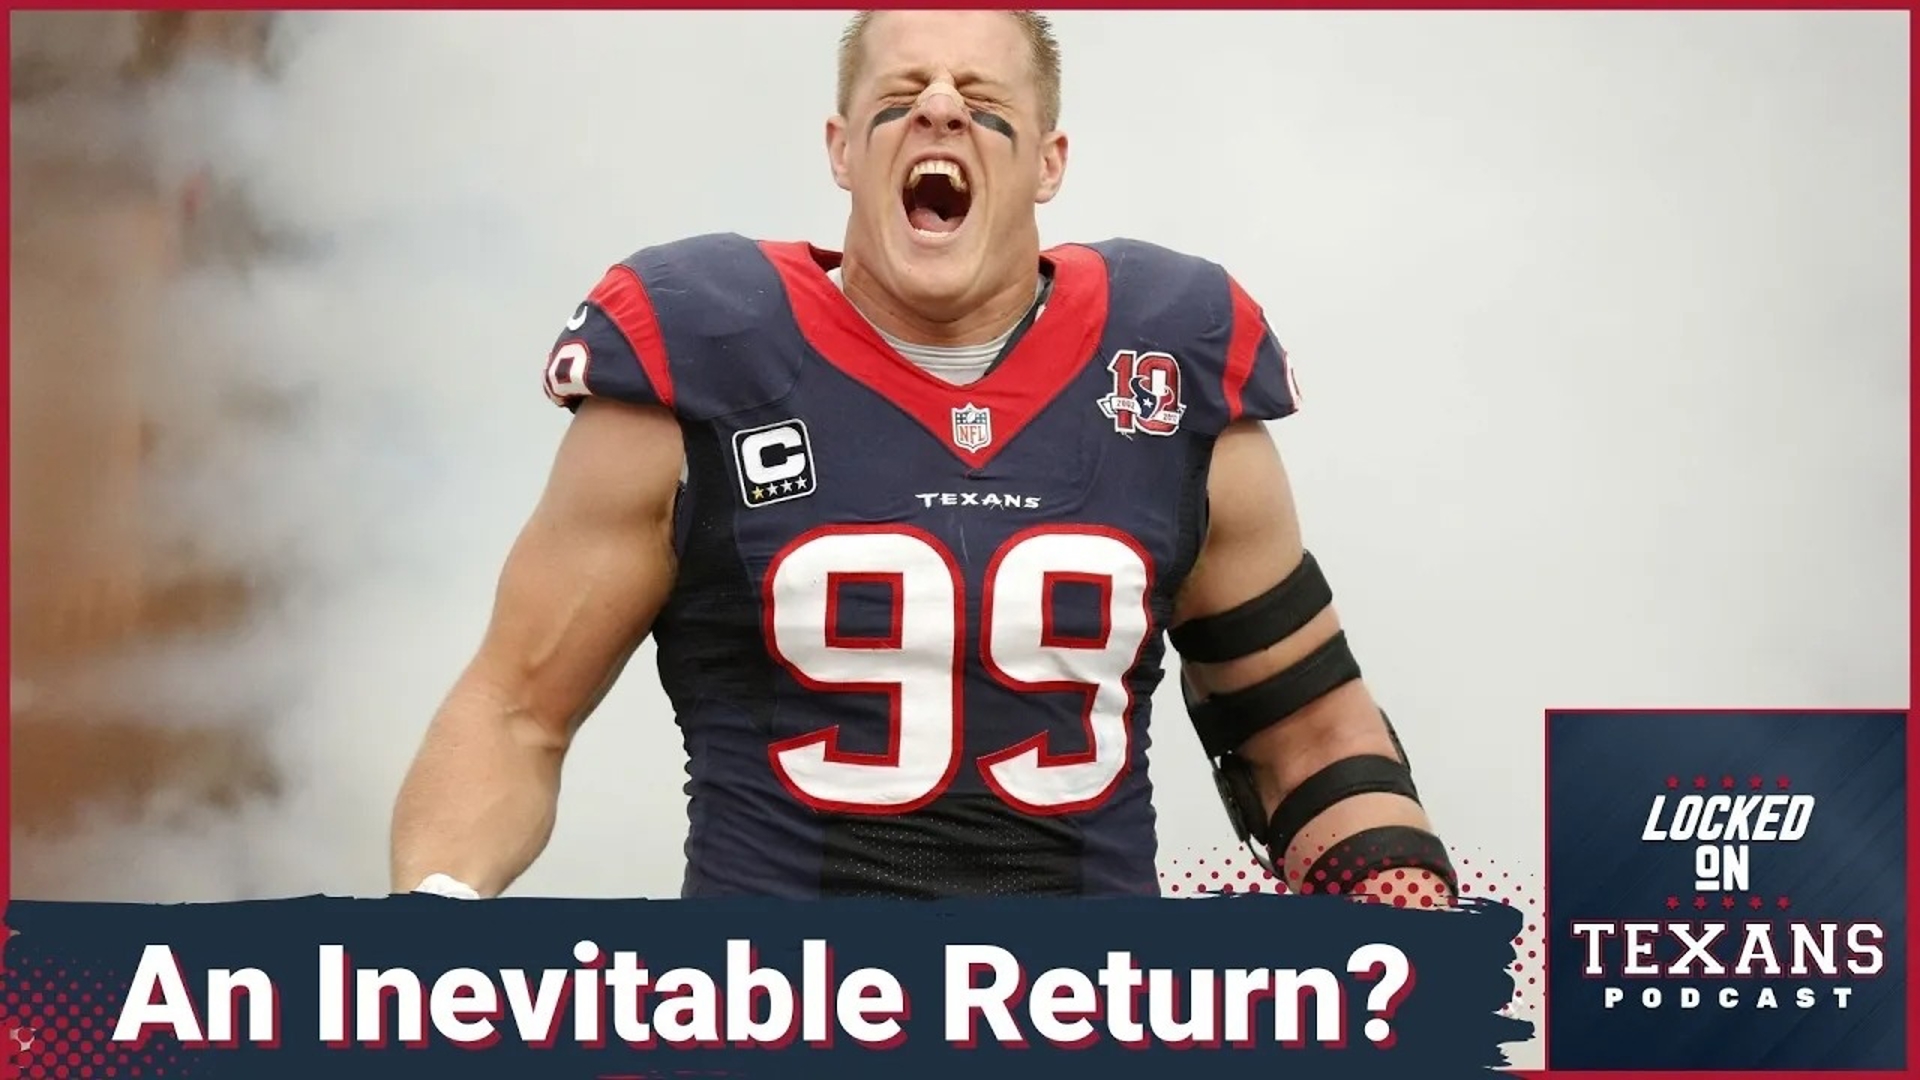 Future Hall of Famer J.J. Watt has hinted at the possibility of returning to the game as a member of the Houston Texans.